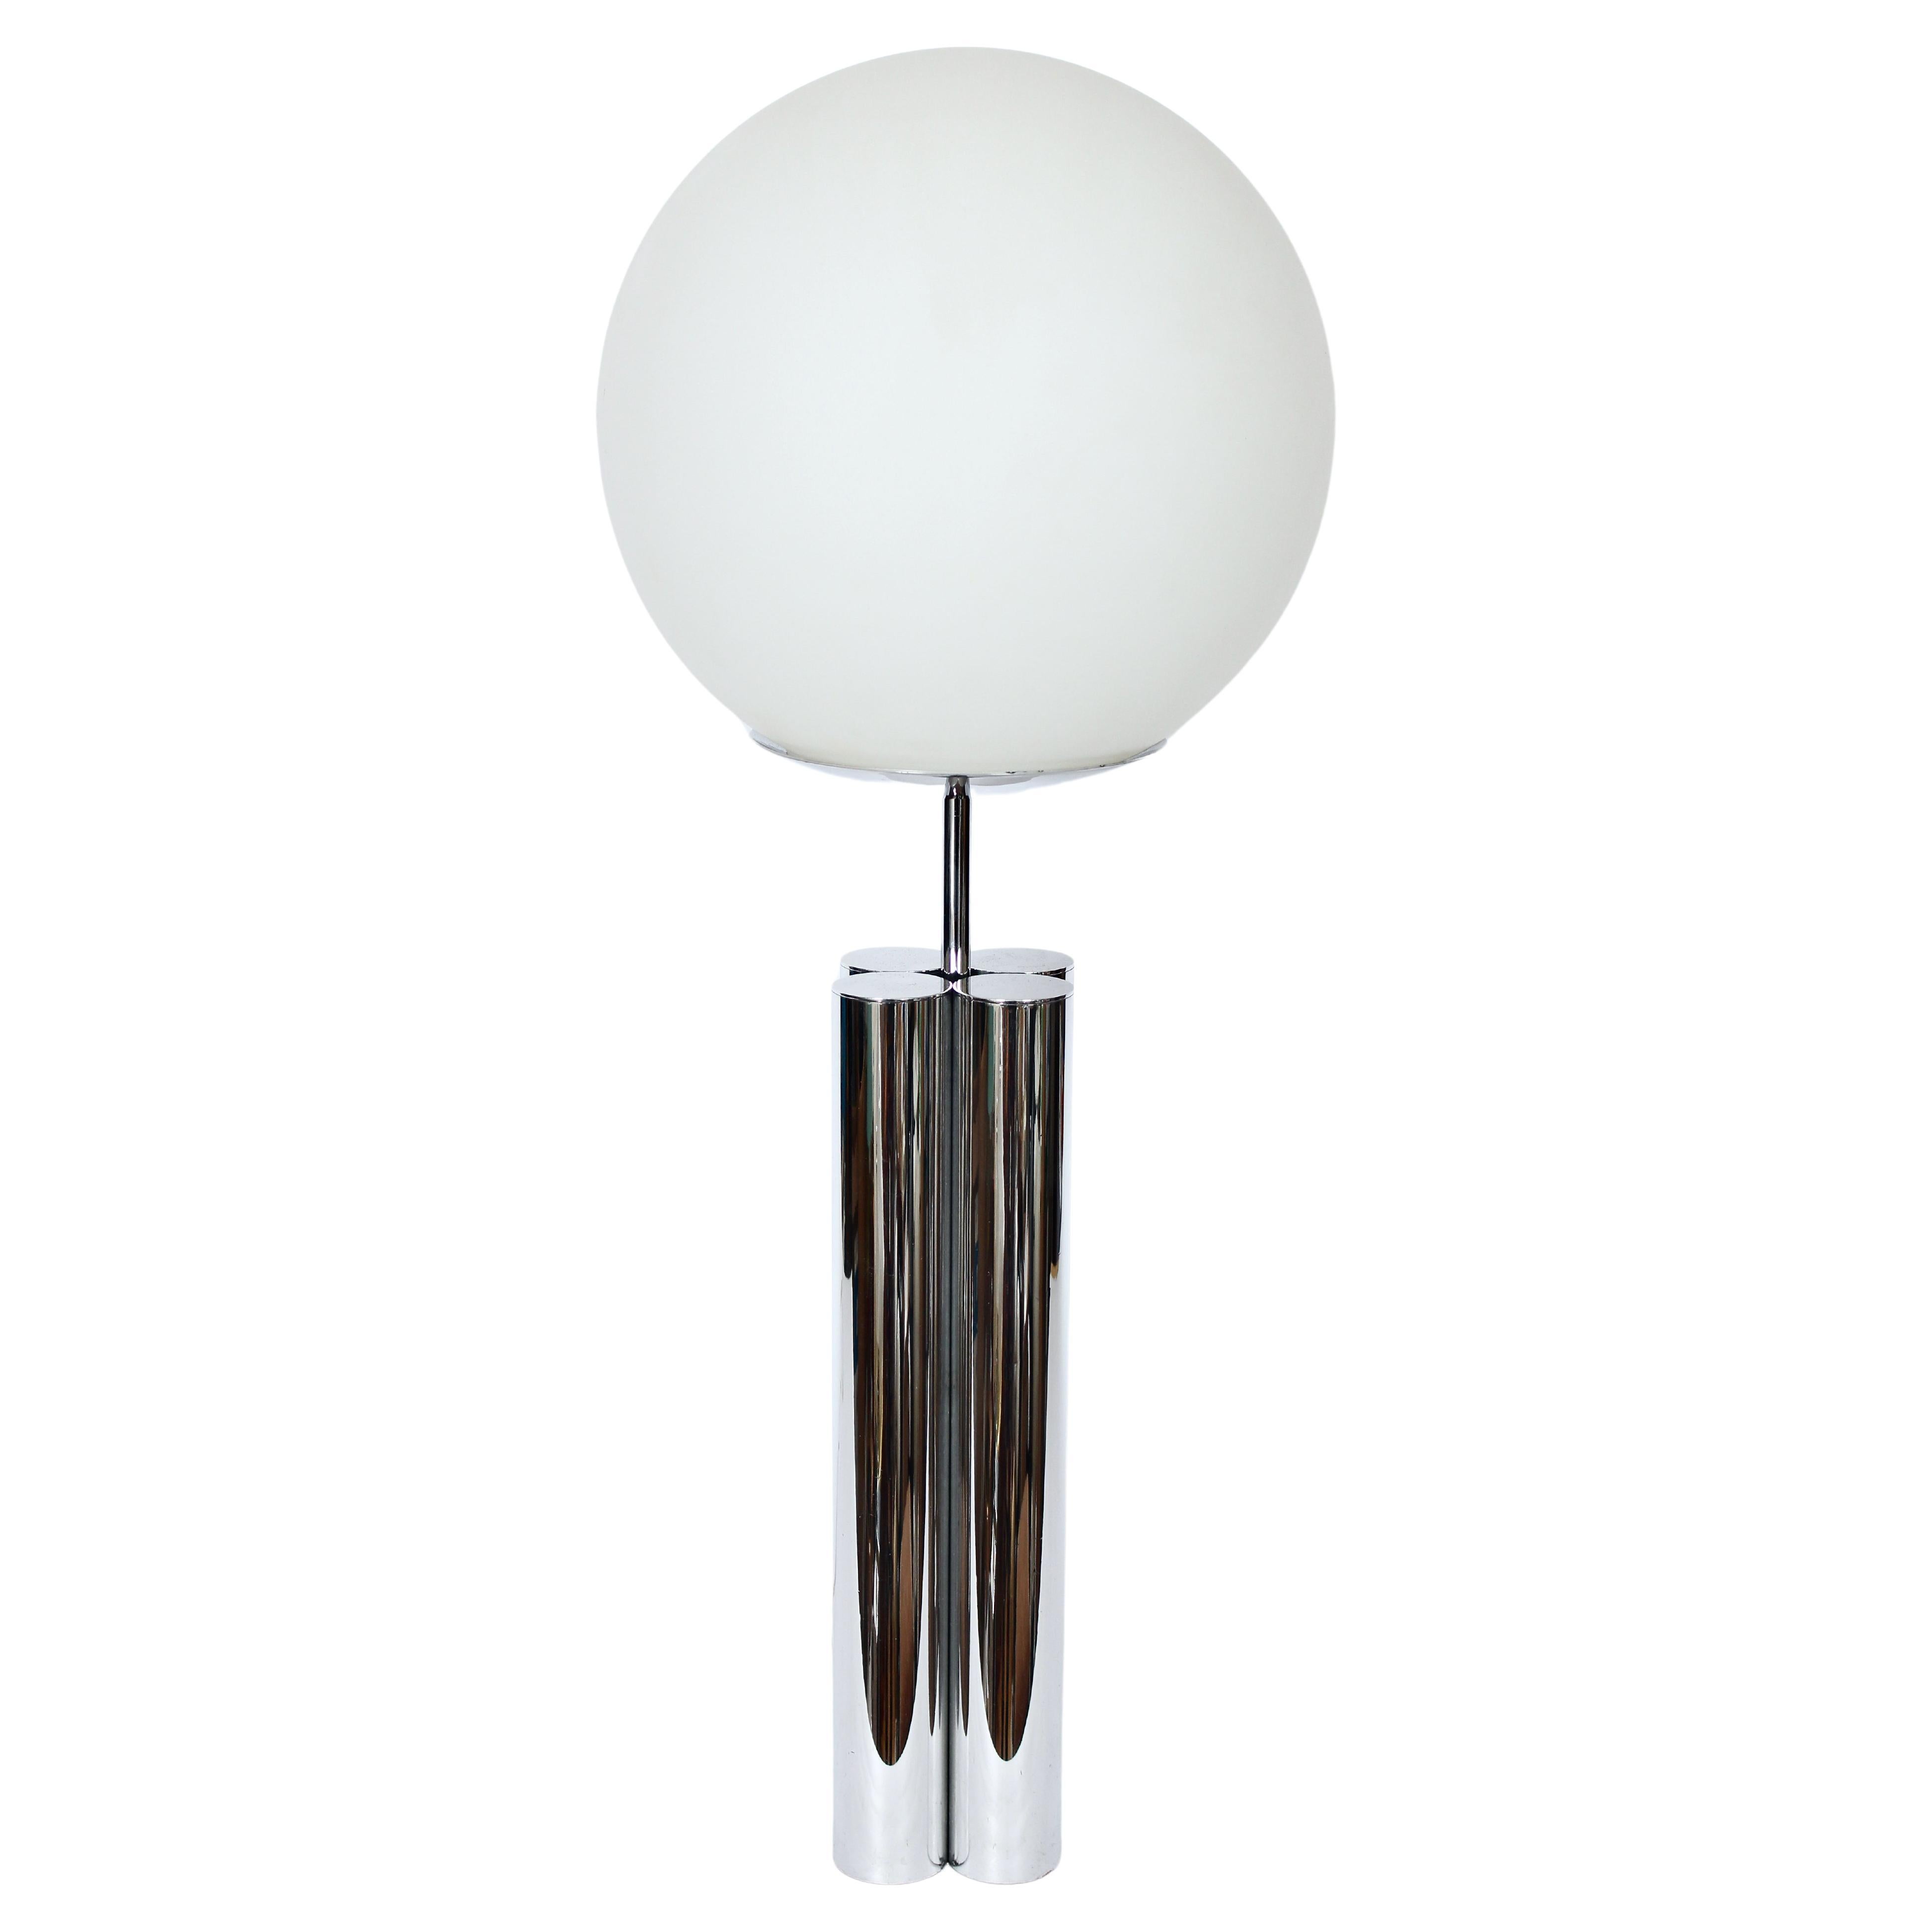 Tall Robert Sonneman for George Kovacs attributed Four Column Table Lamp with White Frosted Glass Globe.  Featuring a four capped tubular balanced, repolished, reflective Aluminum rod lamp base (4W x 4D)  (Rods 2D each), circular dish shade platform